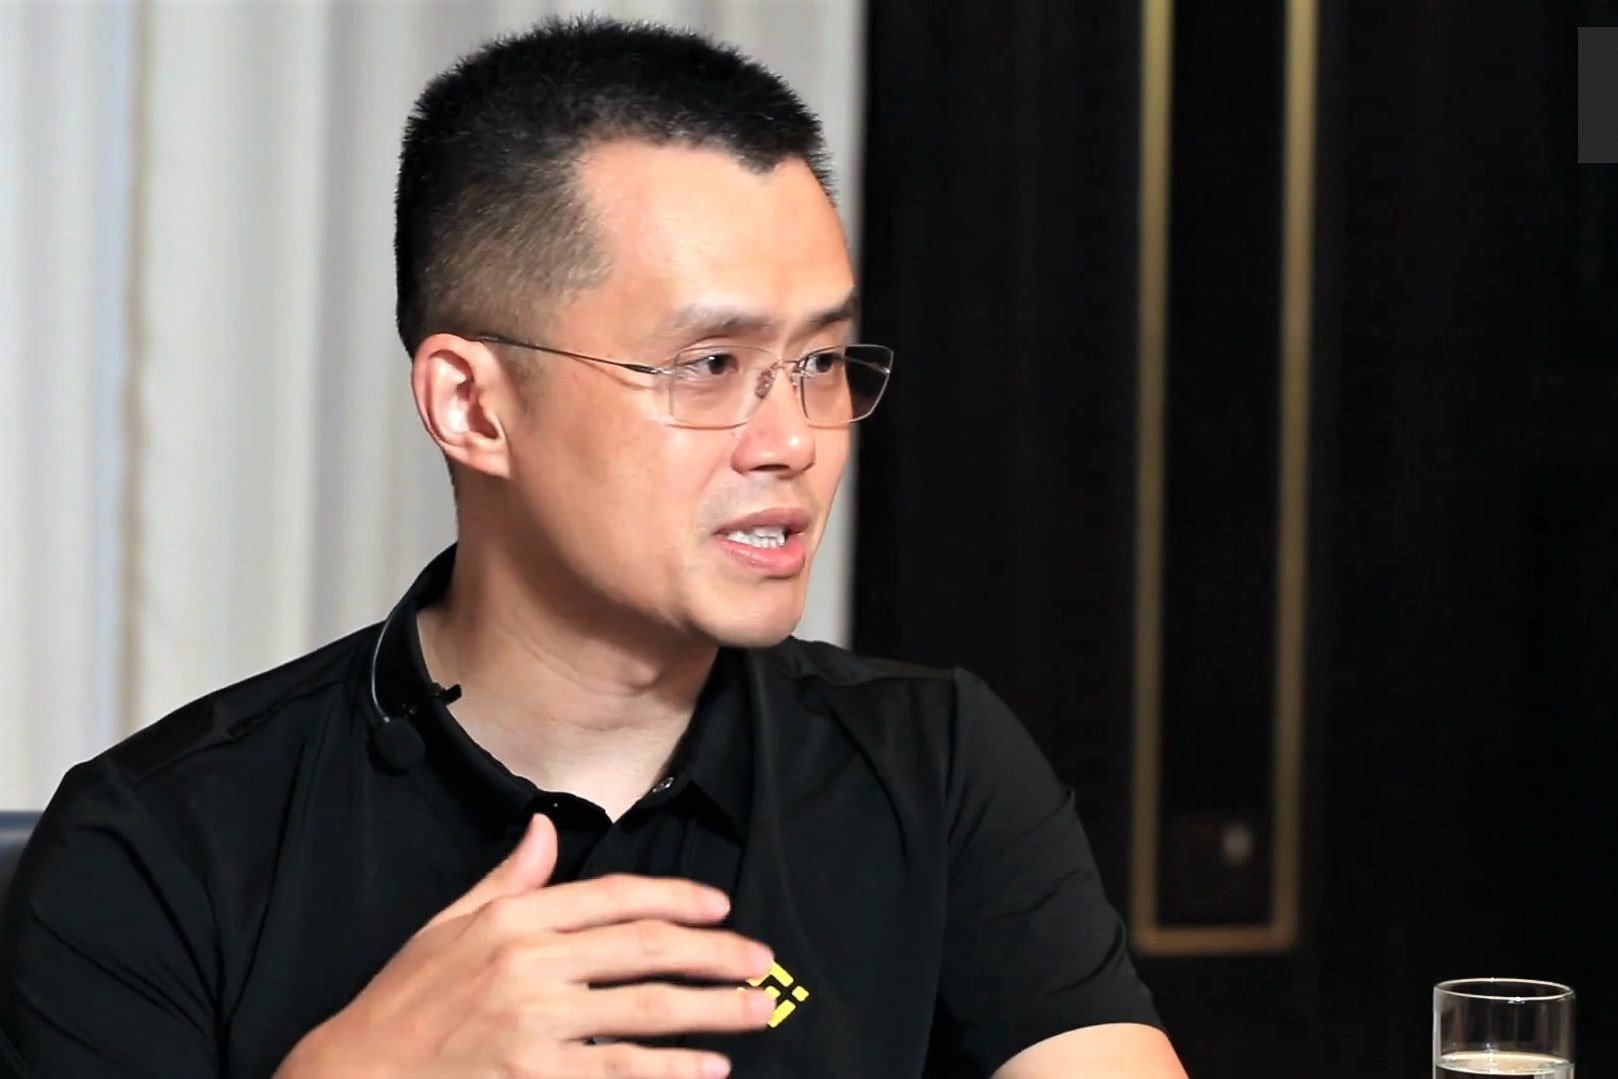 binance-ceo-reveals-main-reason-for-investing-usd500-million-in-elon-musk-twitter-deal